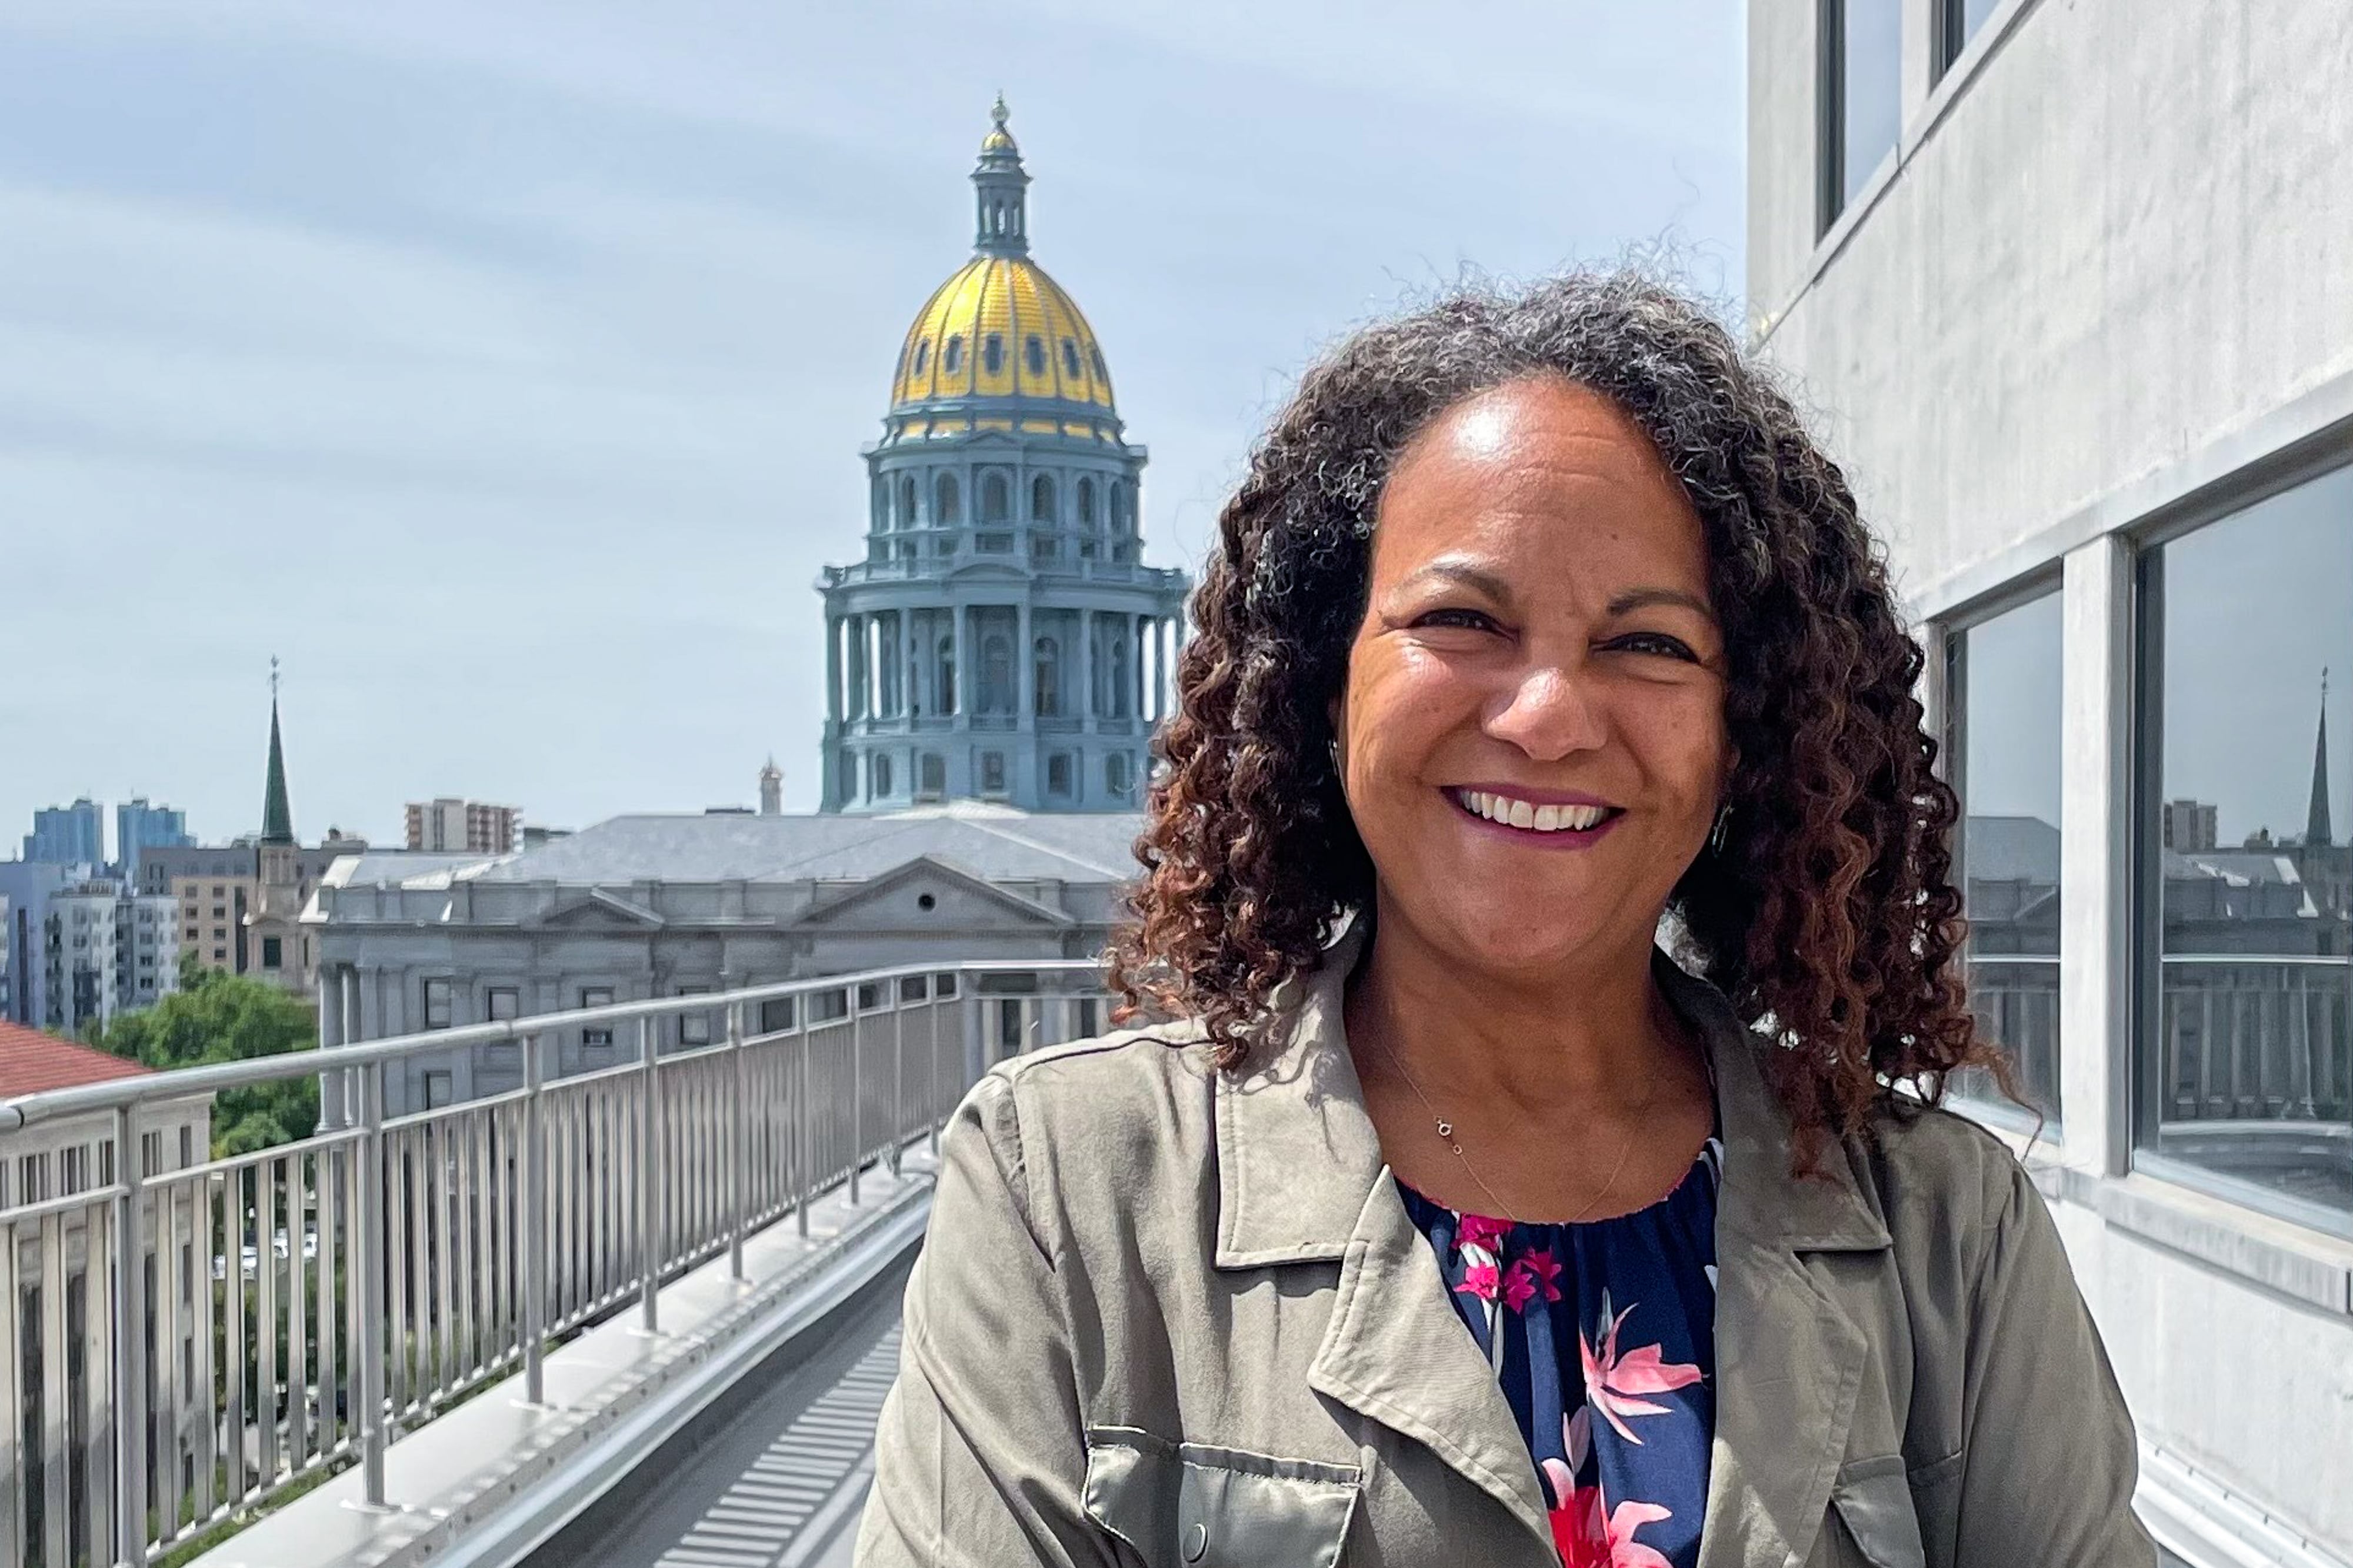 A woman with curly brown hair smiles for a portrait, standing on a balcony with the Colorado State Capitol behind her.